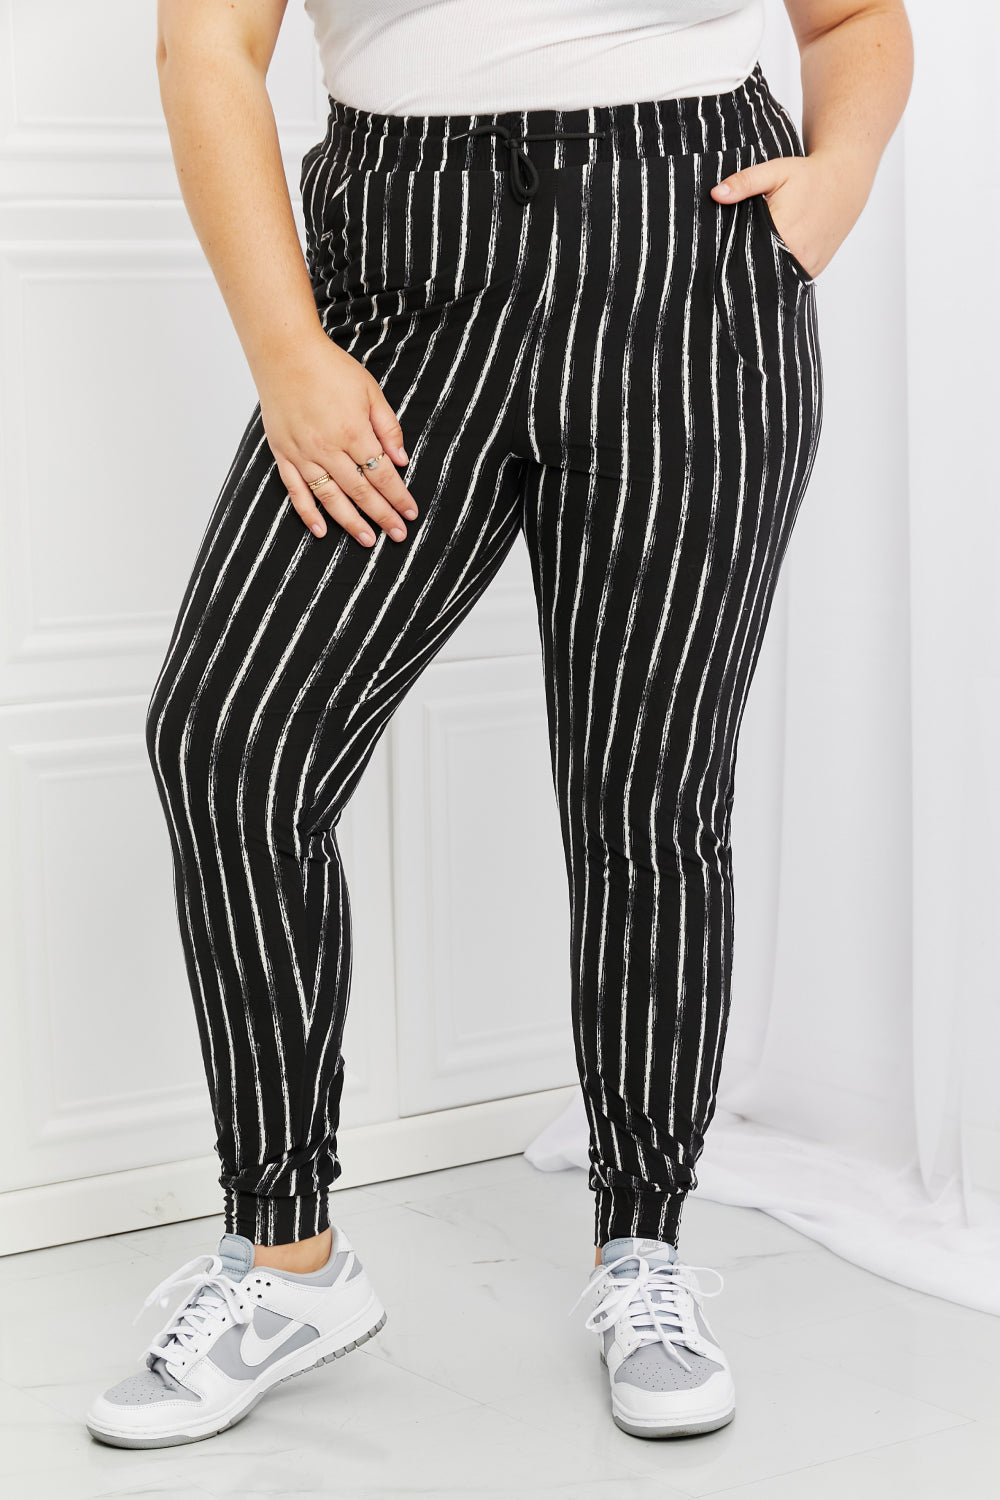 Leggings Depot Stay In Full Size Joggers-Pants-Inspired by Justeen-Women's Clothing Boutique in Chicago, Illinois